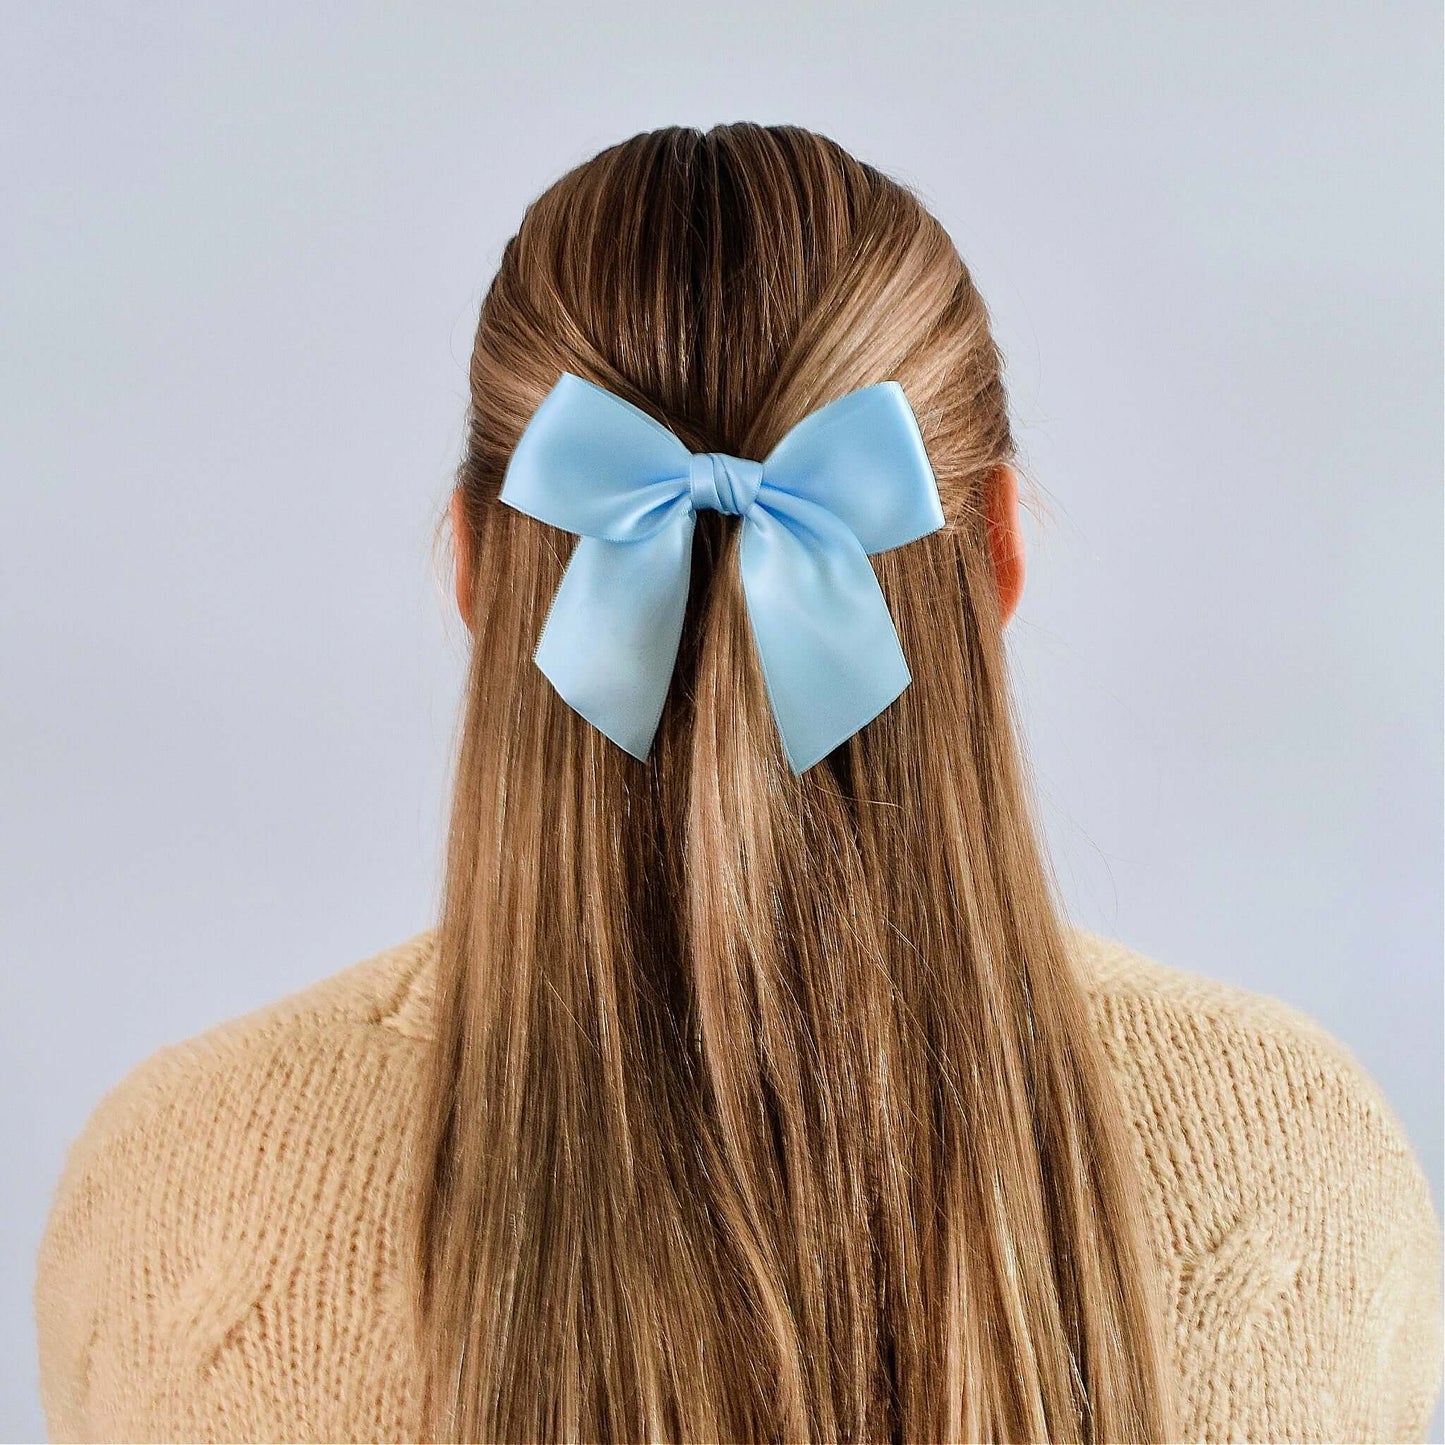 Blonde girl wearing a light blue grosgrain sailor hair bow with long straight hair, back view